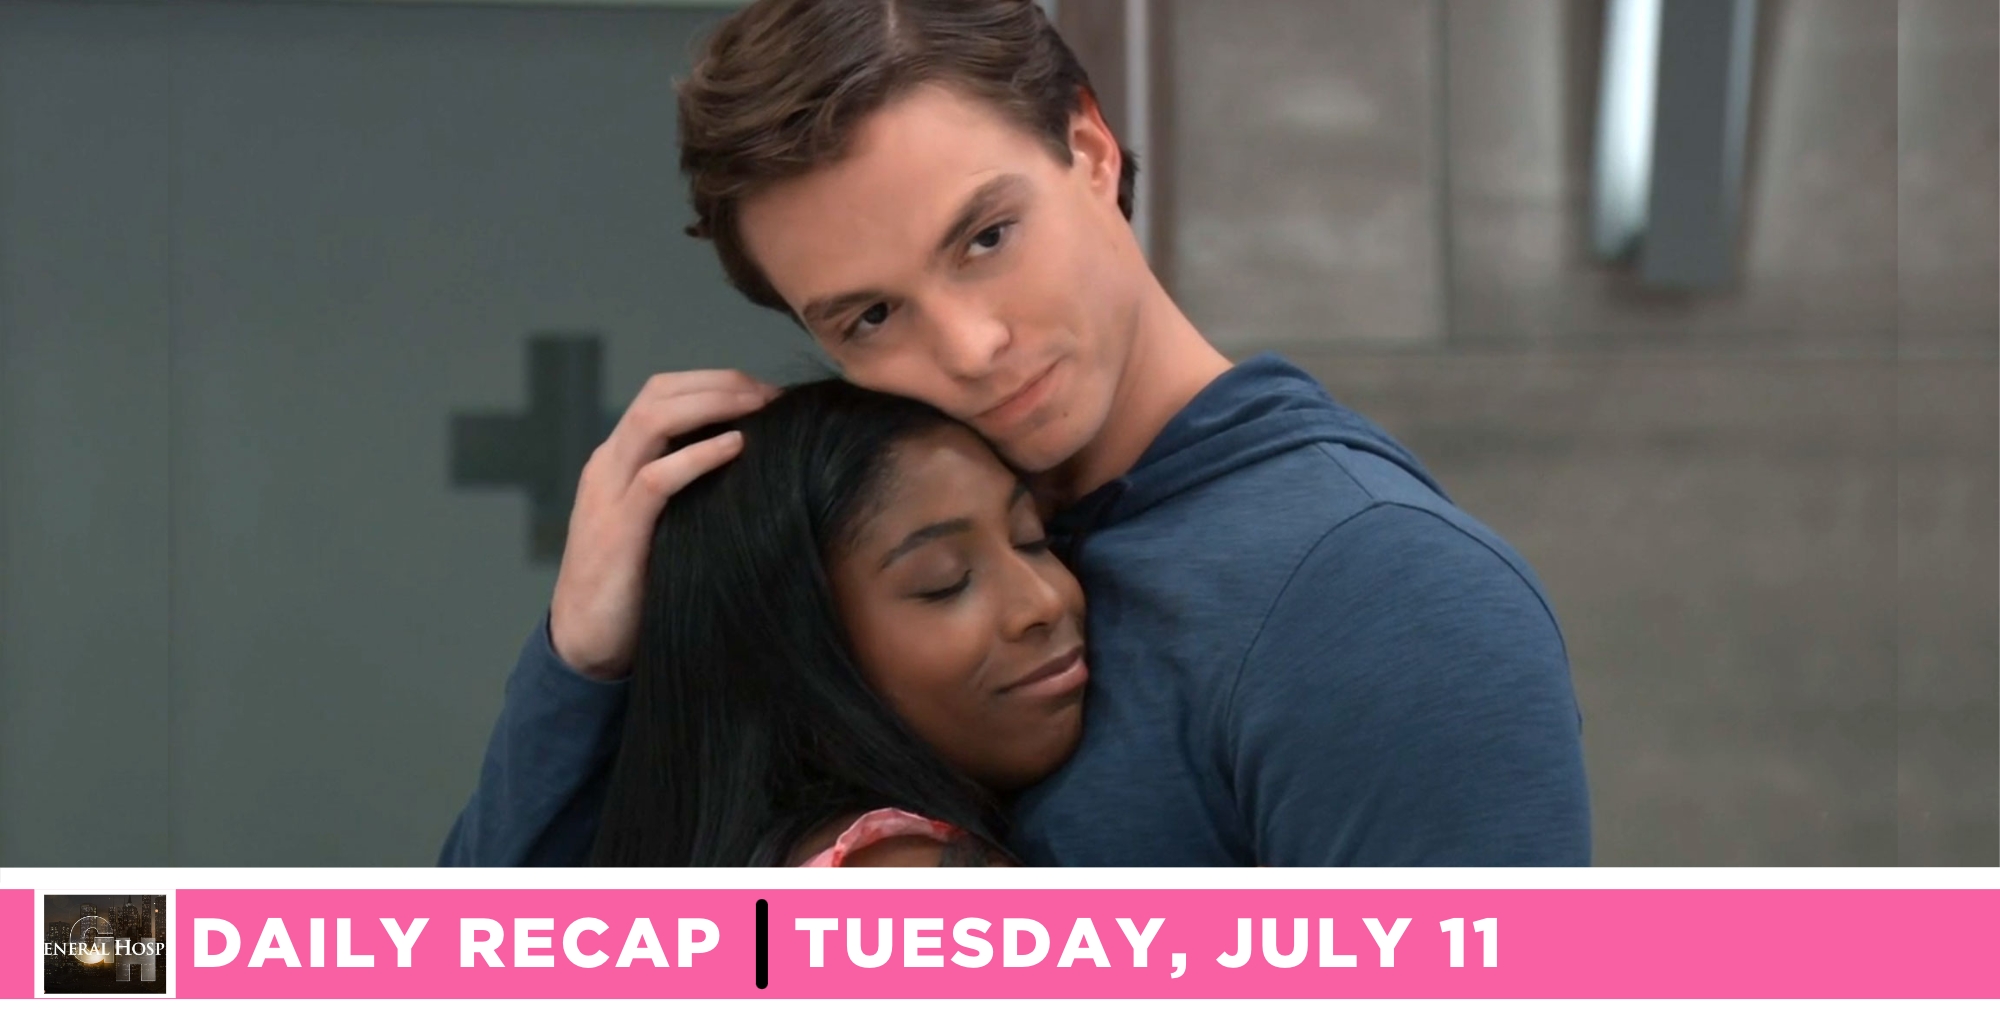 the general hospital recap for july 11 have spencer there to comfort trina.